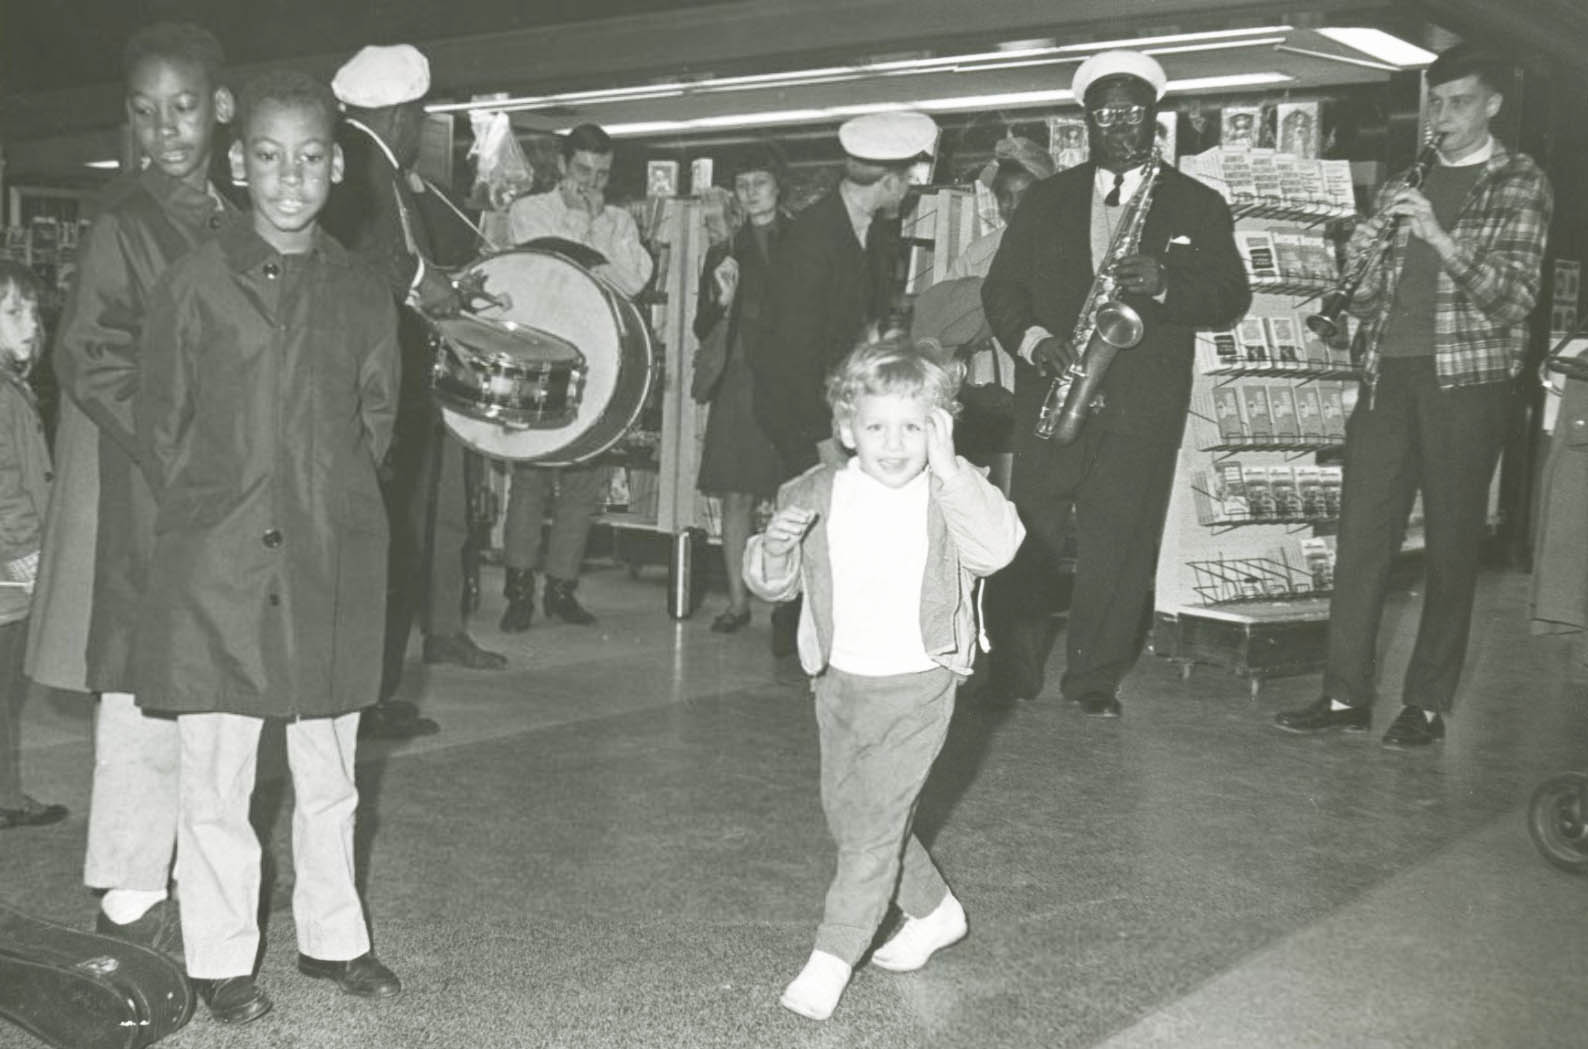 Tom Sancton (pictured far right) plays clarinet with the Louis James Footwarmers, circa 1965 at Union Passenger Terminal in New Orleans, photographer: Jack Hurley; Hogan Archive Photography Collection PH002031, Hogan Archive of New Orleans Music and New Orleans Jazz, Tulane University Special Collections.